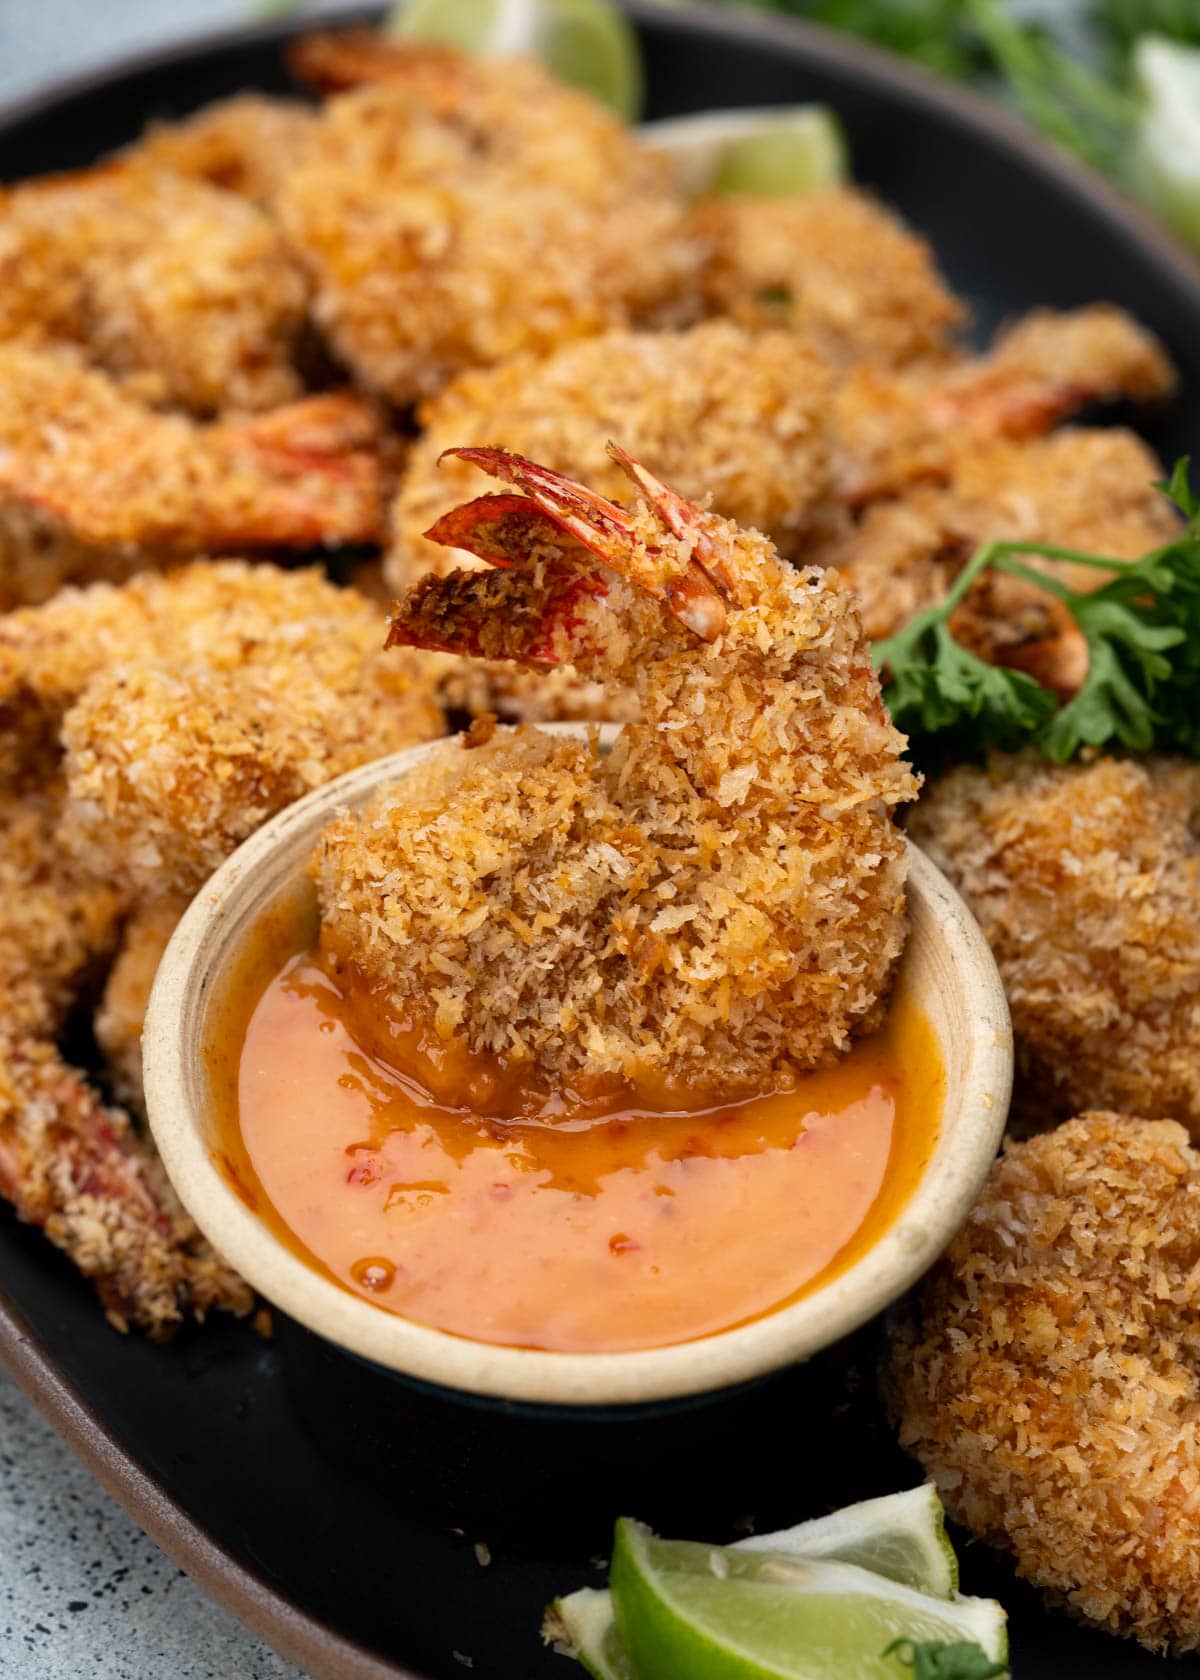 Coconut Shrimp served with sweet and Spicy Mayo dip.